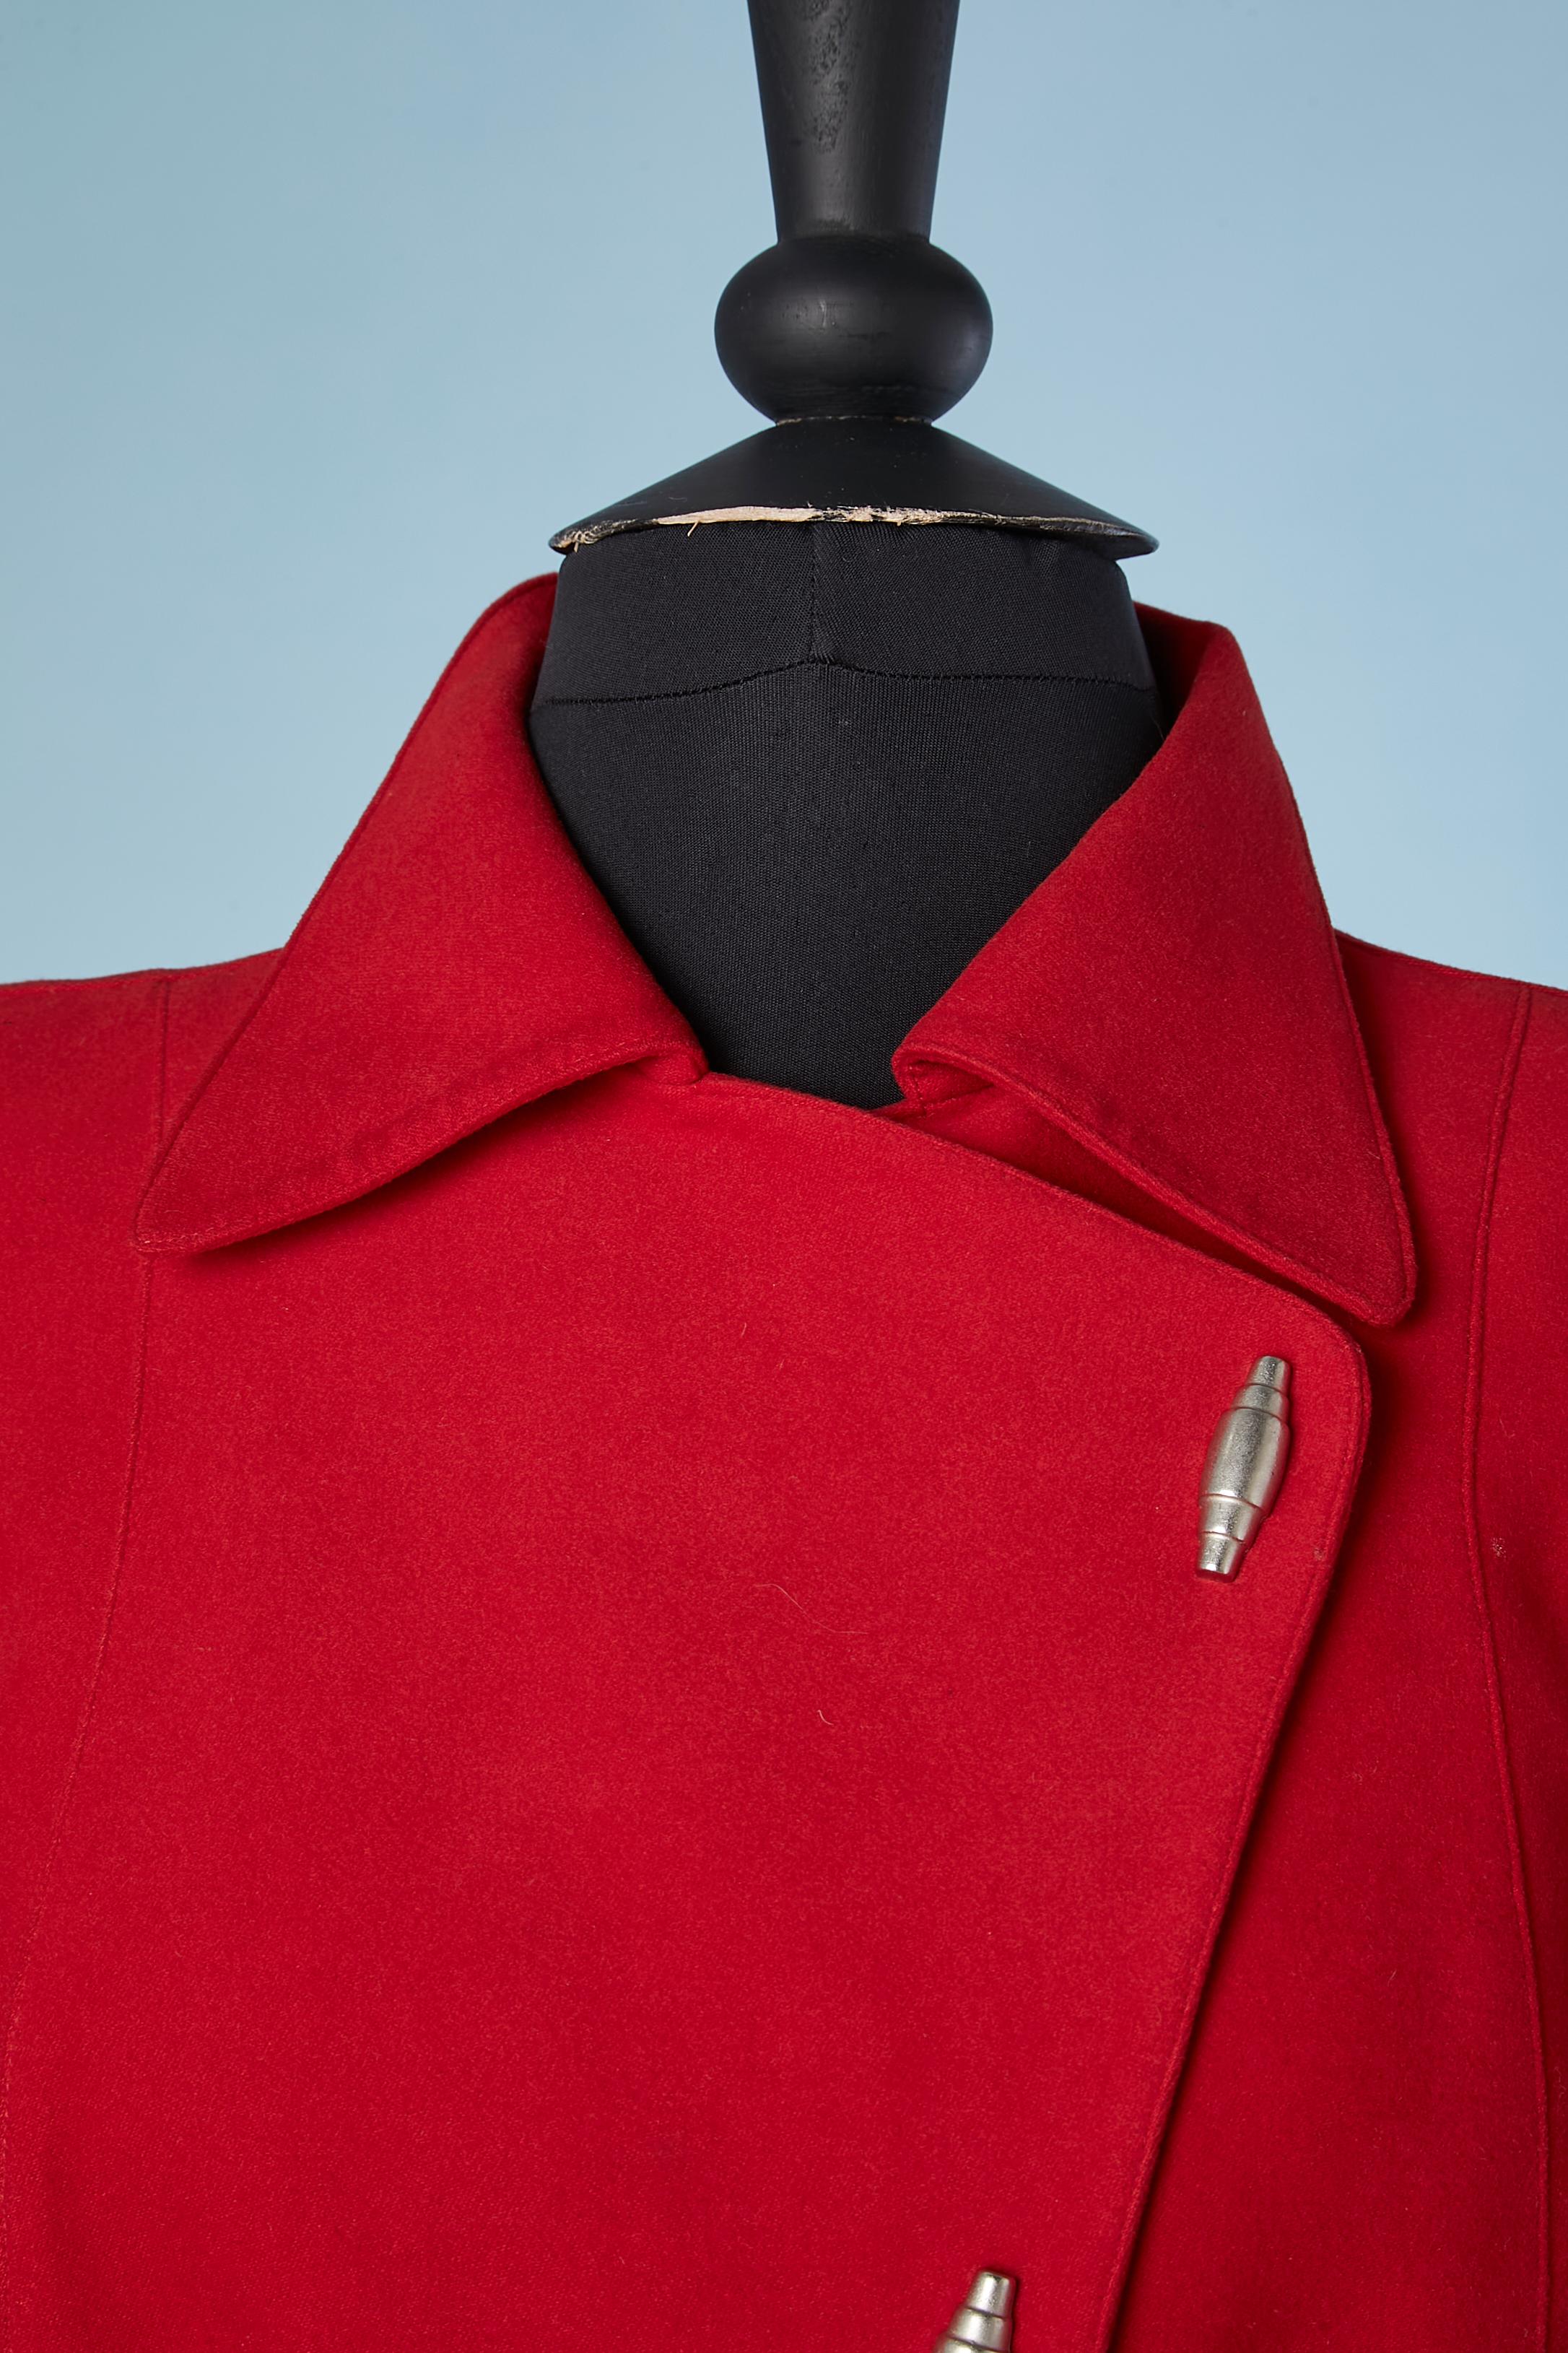 Red jacket with metallic snaps. Shoulder pads. Half-belt in the same fabric on both side of the waist.Fabric composition: 40% cotton, 40% rayon, 20% polyester. Lining: 100% acetate.
SIZE 40 (It) 36 (Fr) 6 (Us) 